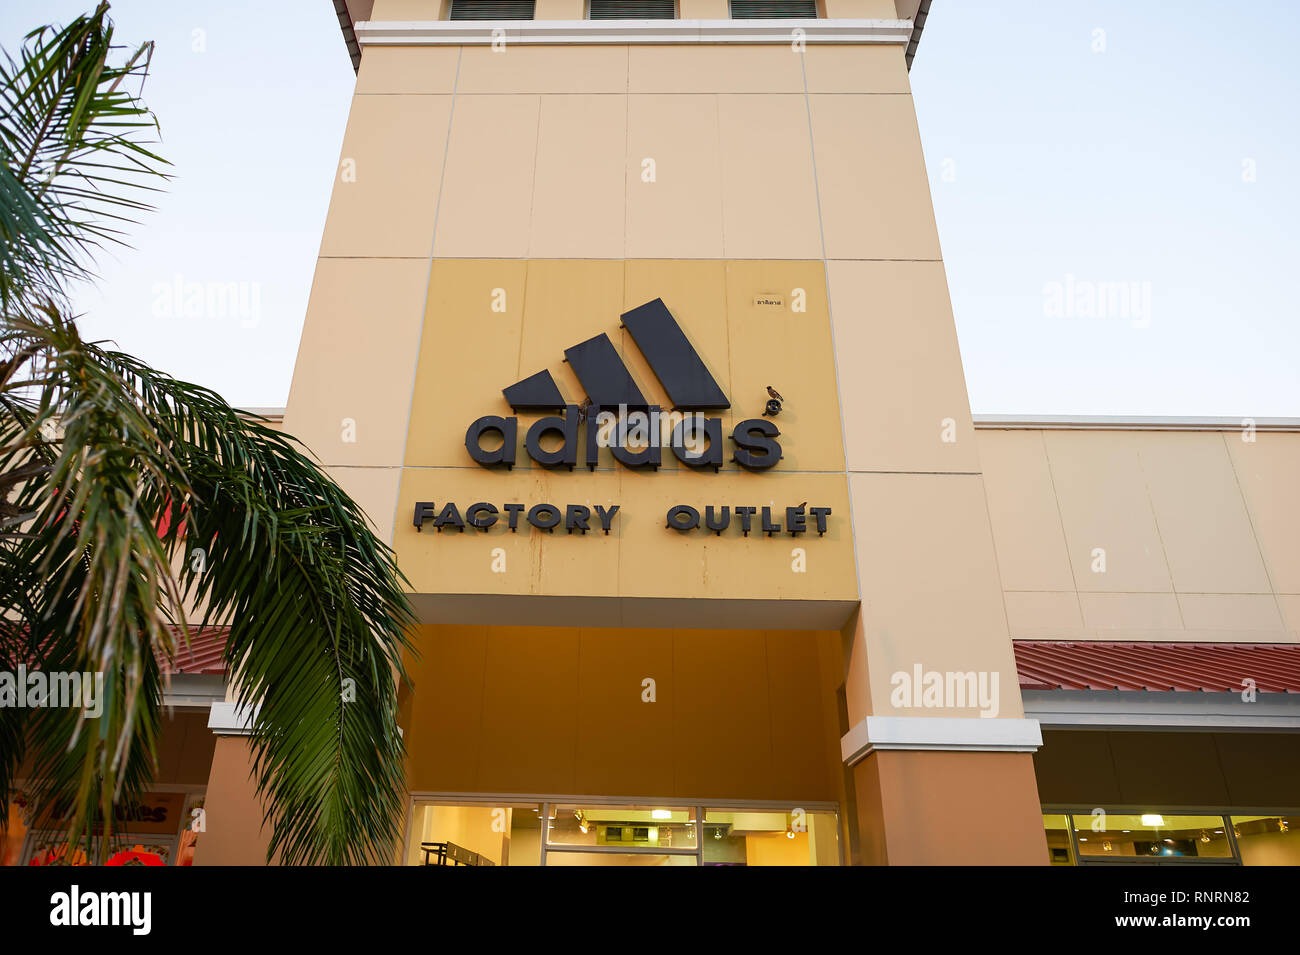 adidas outlet watertown